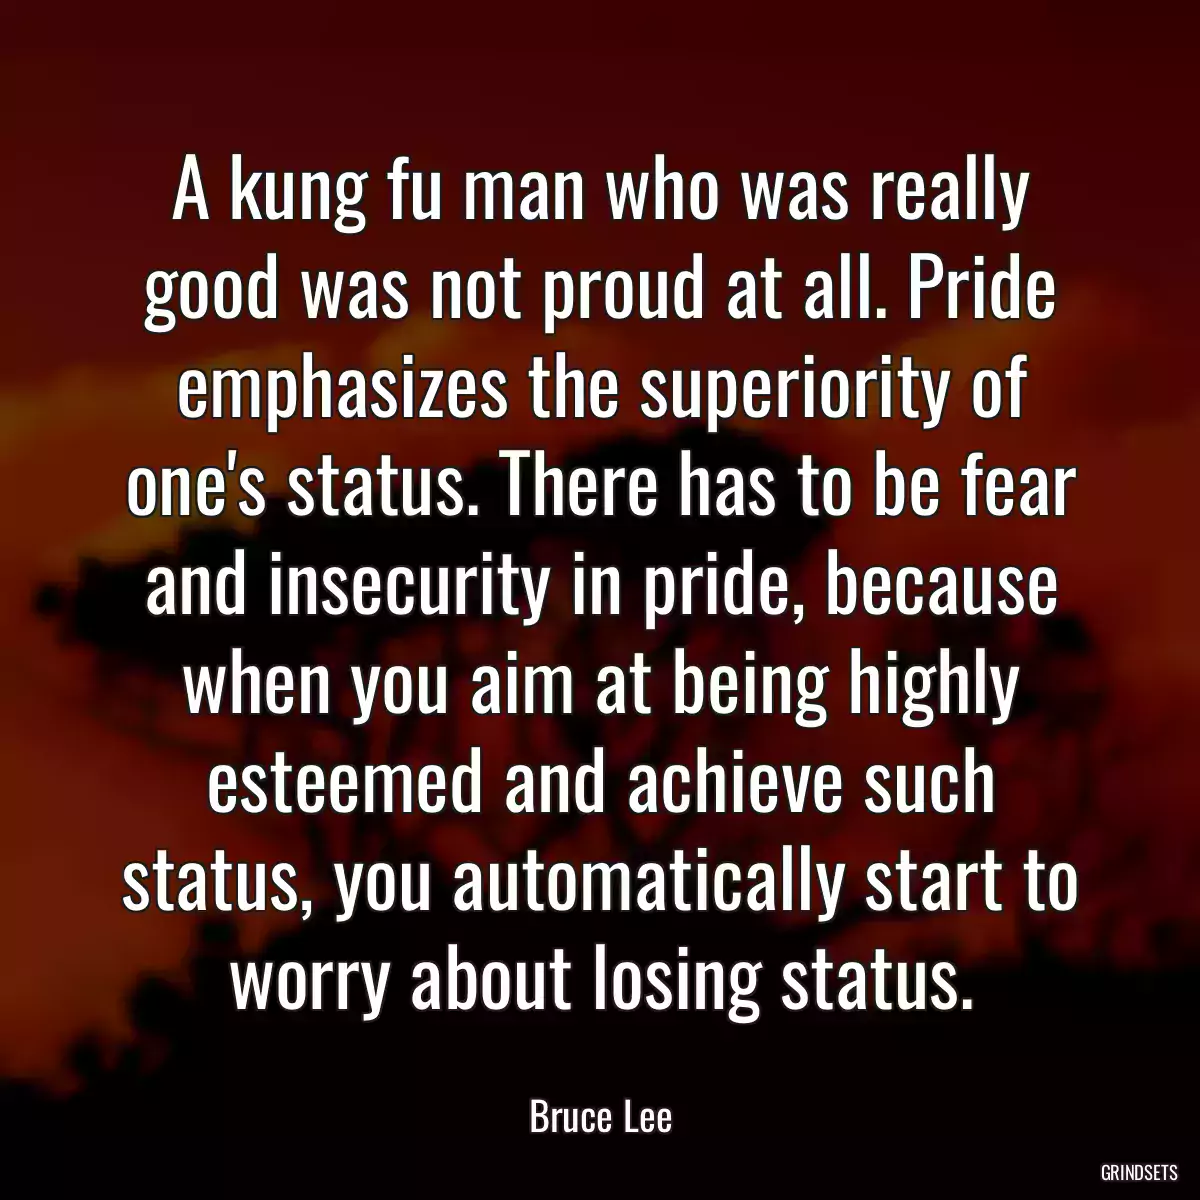 A kung fu man who was really good was not proud at all. Pride emphasizes the superiority of one\'s status. There has to be fear and insecurity in pride, because when you aim at being highly esteemed and achieve such status, you automatically start to worry about losing status.